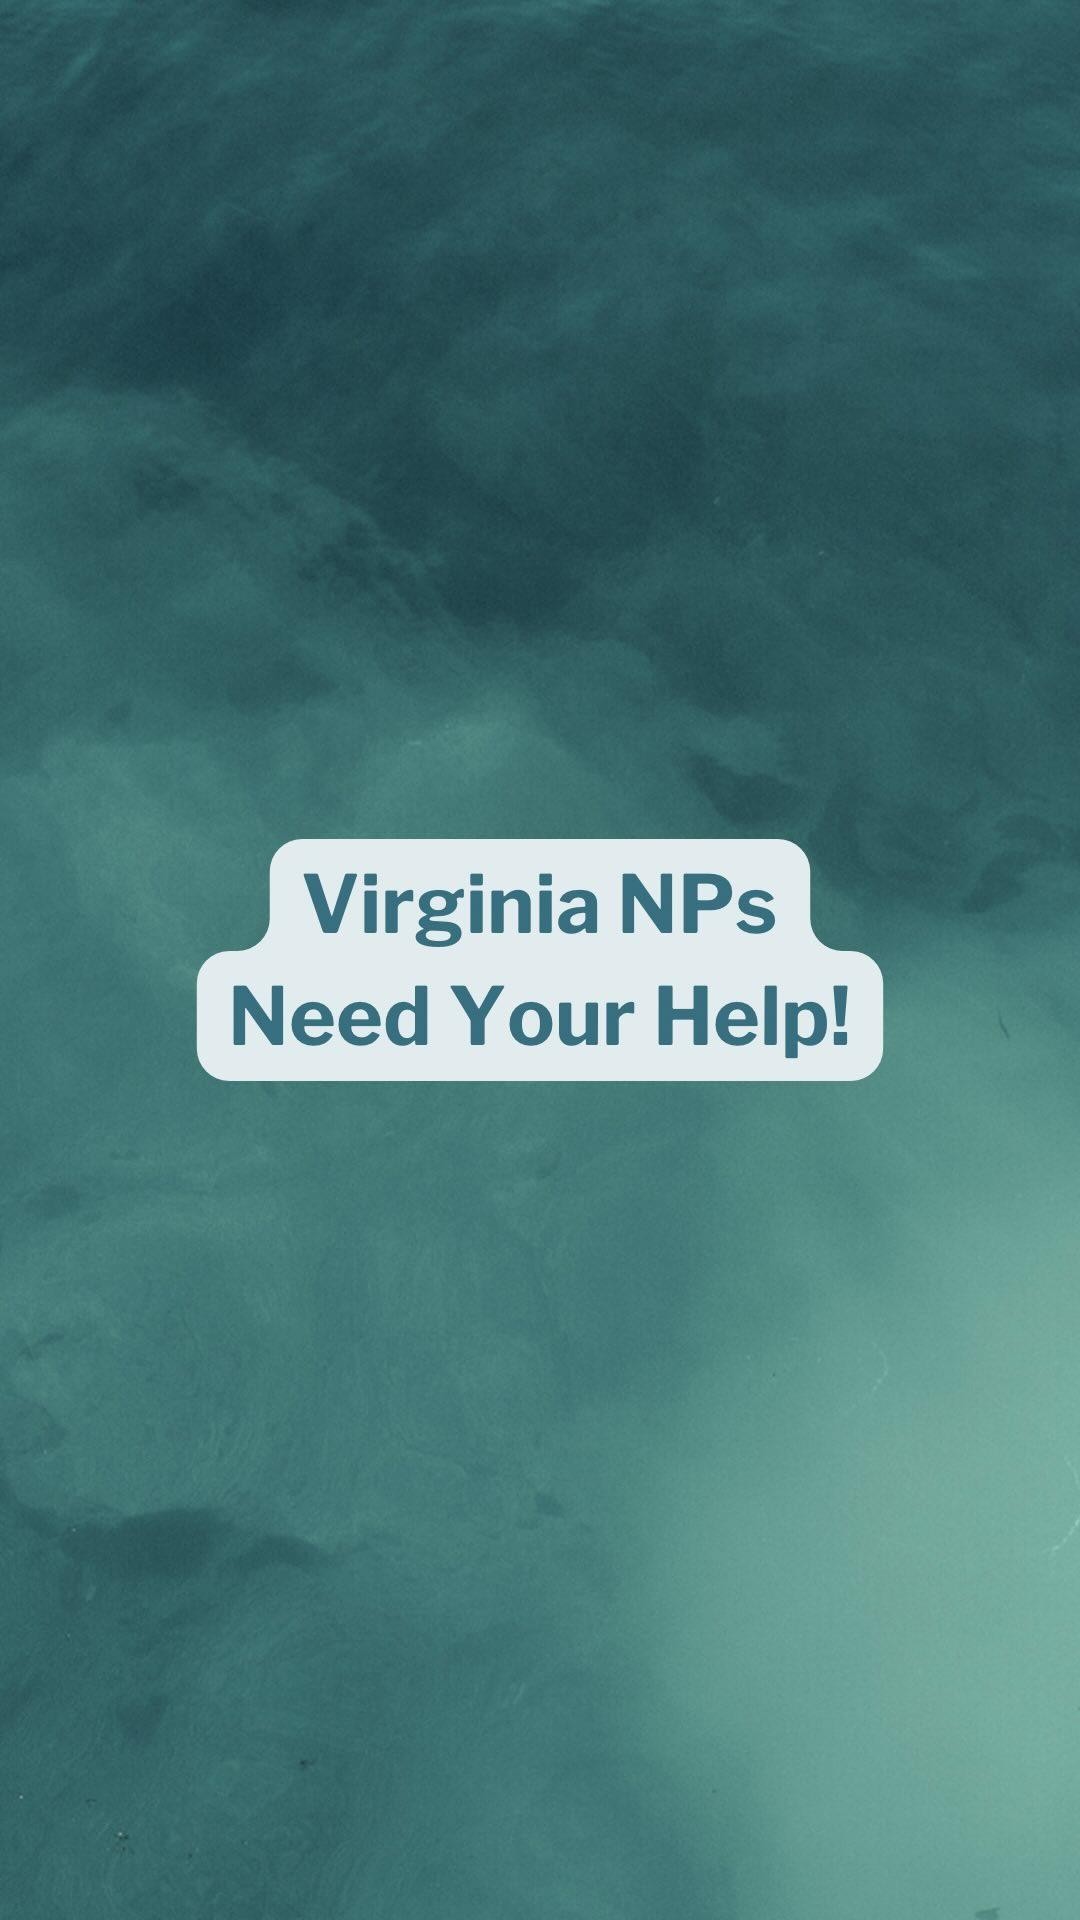 Help Virginia Nurse Practitioners 🏛 ↓

Contact your legislators in support of HB 971 & HB 983.

As it stands today, NPs 